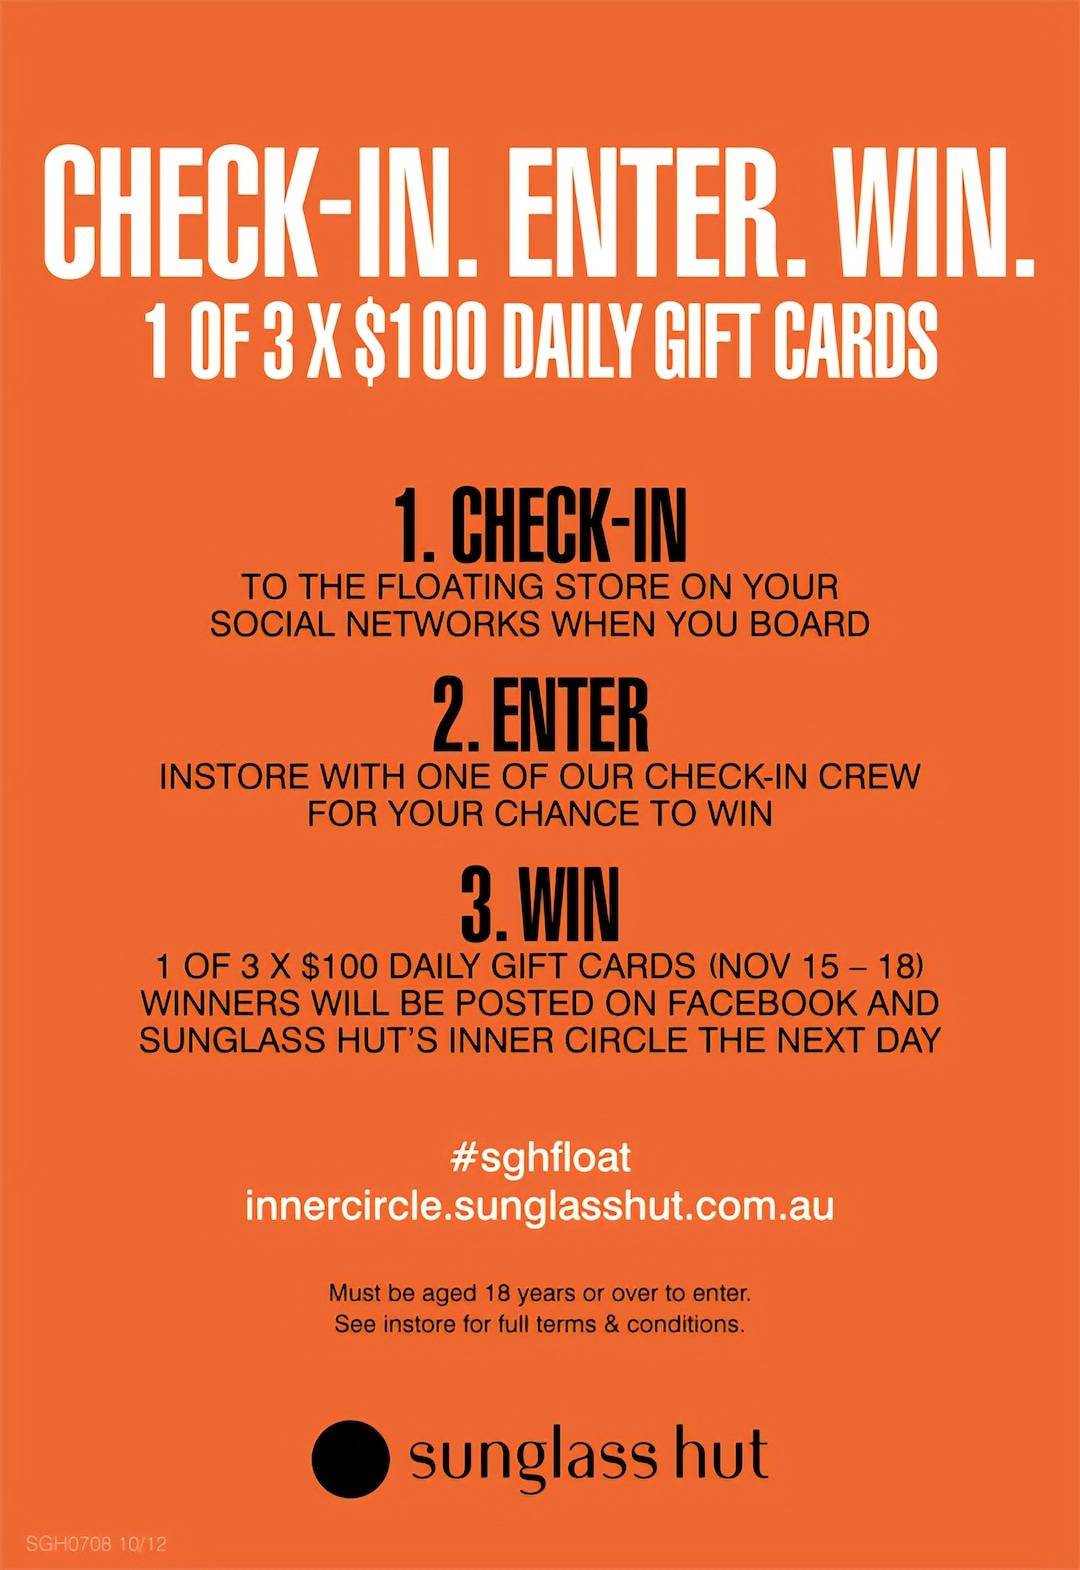 Contest promotion on a flyer from retail store